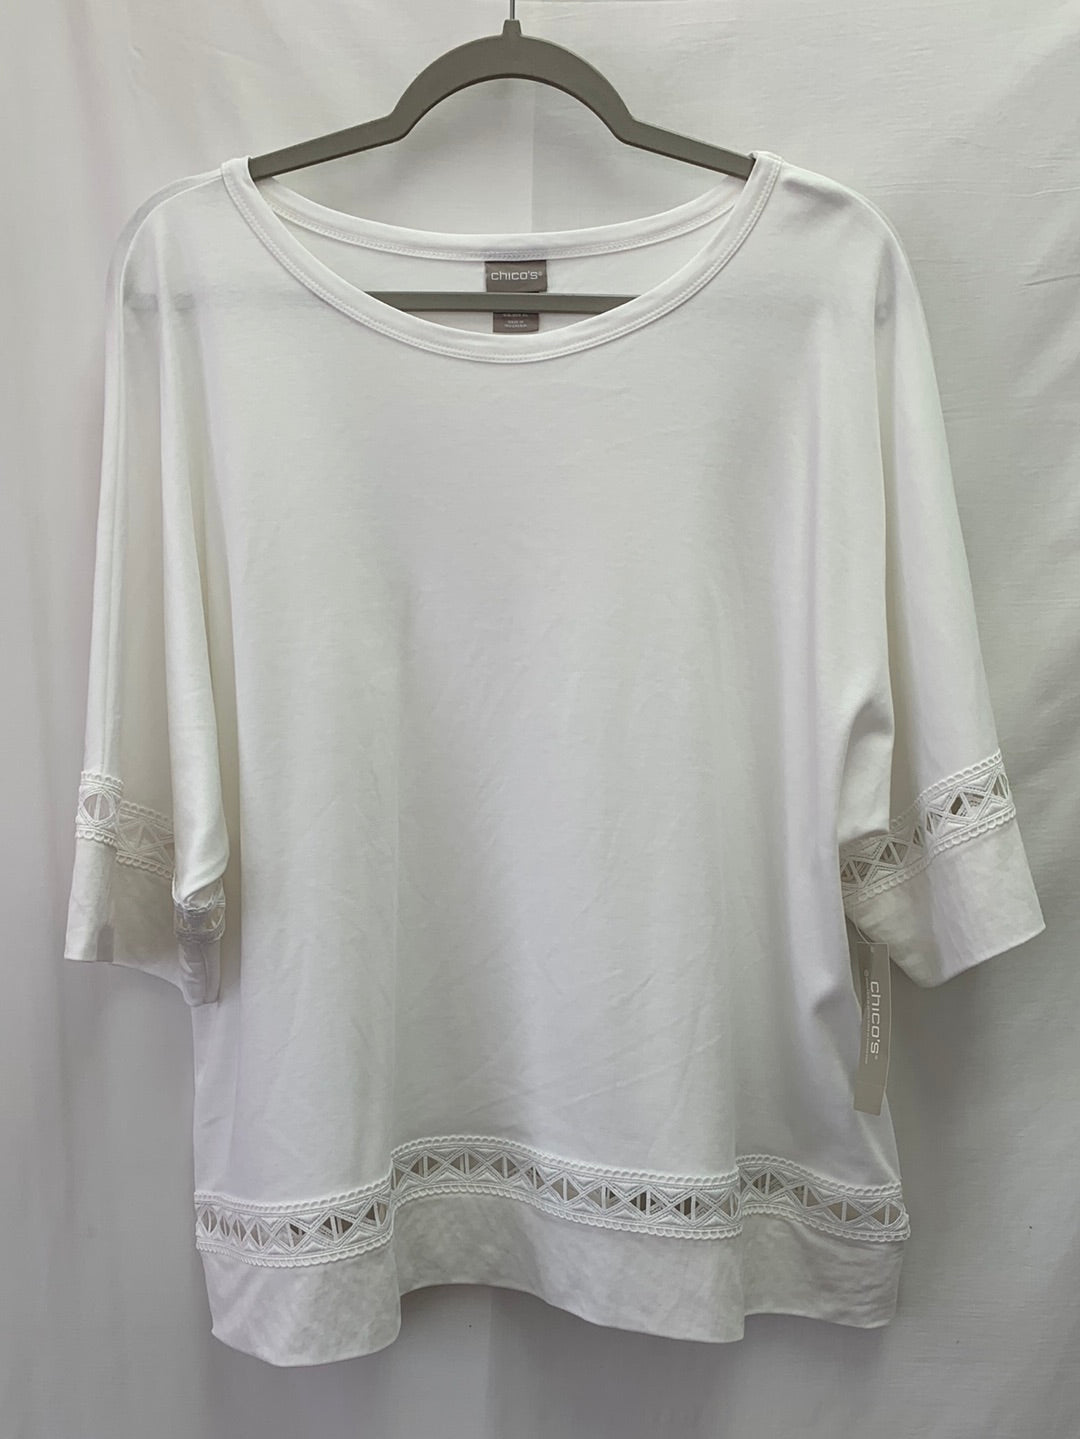 NWT - CHICO'S alabaster white Lace Trim 1/2 Sleeve Knit Top - 3 (XL 16/18)